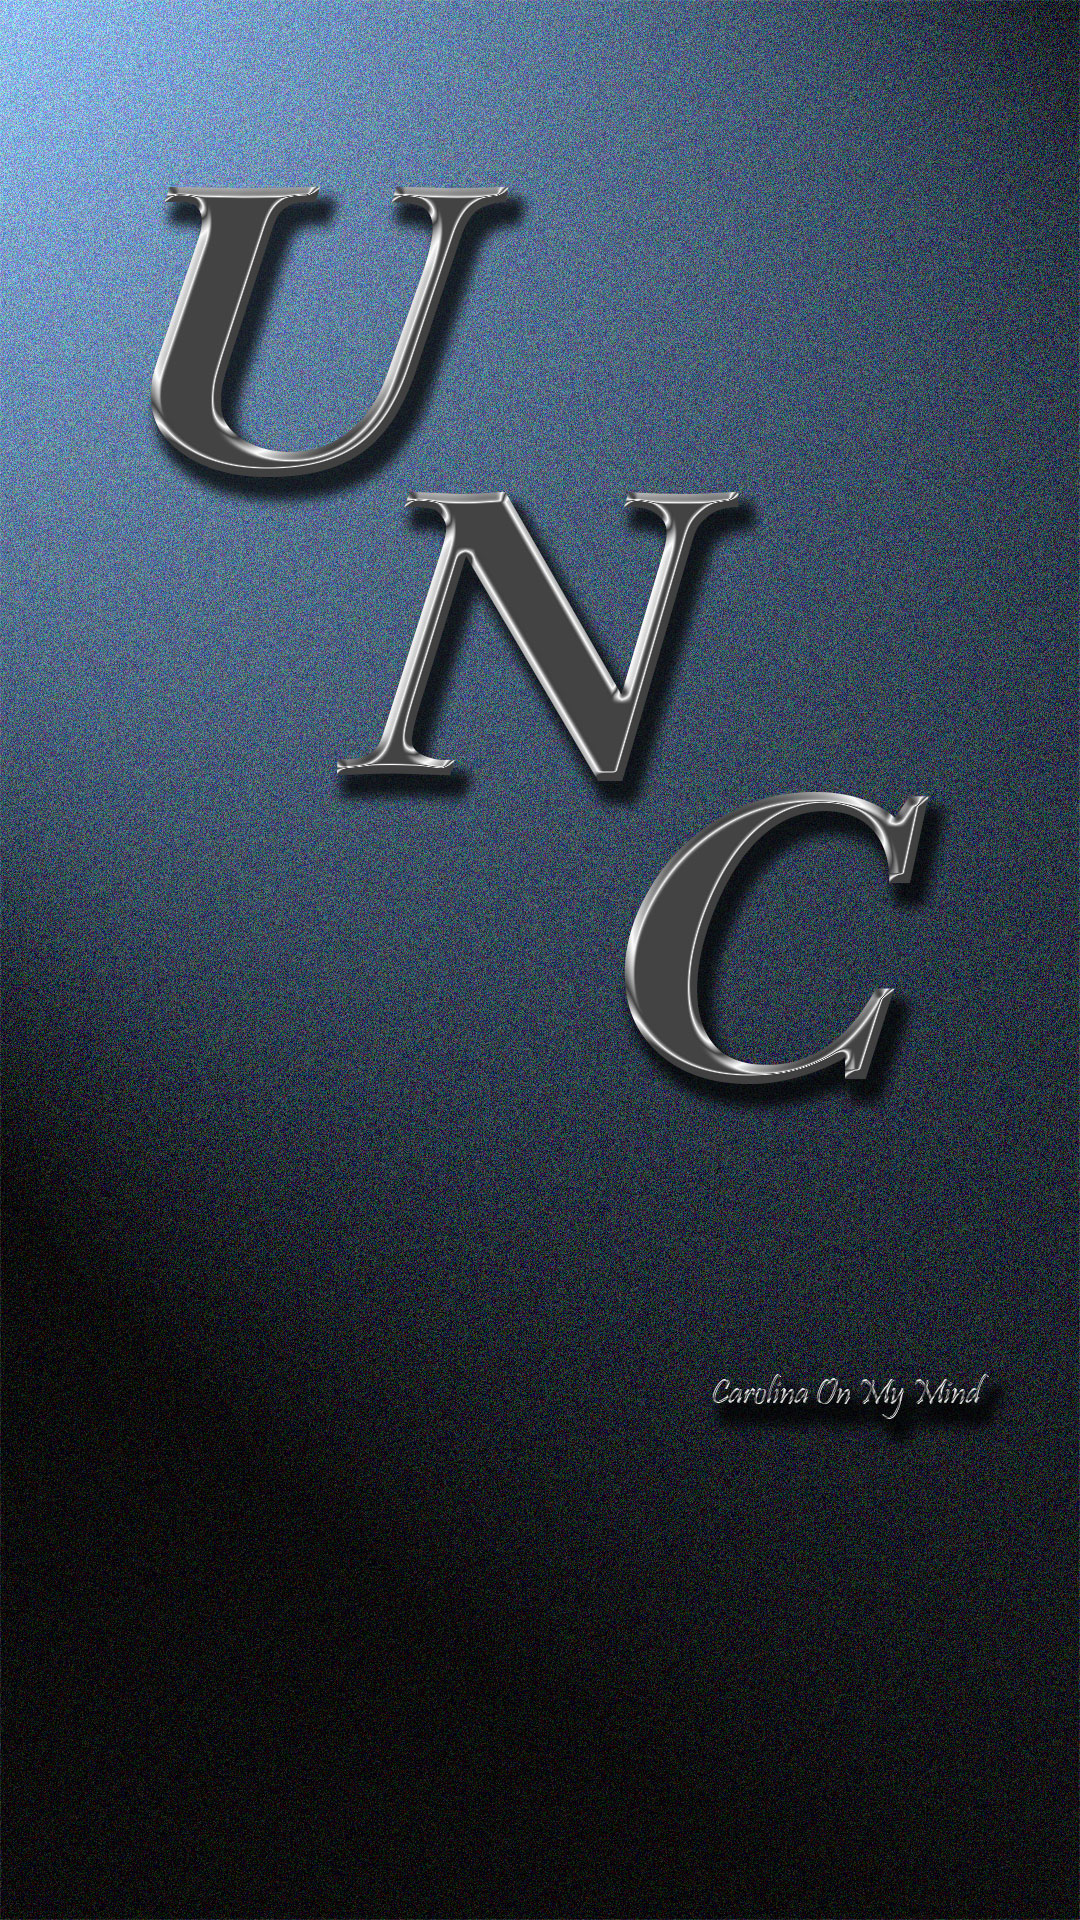 UNC Wallpaper Metal Letters Staggered on Lit Wall 1080 x 1920